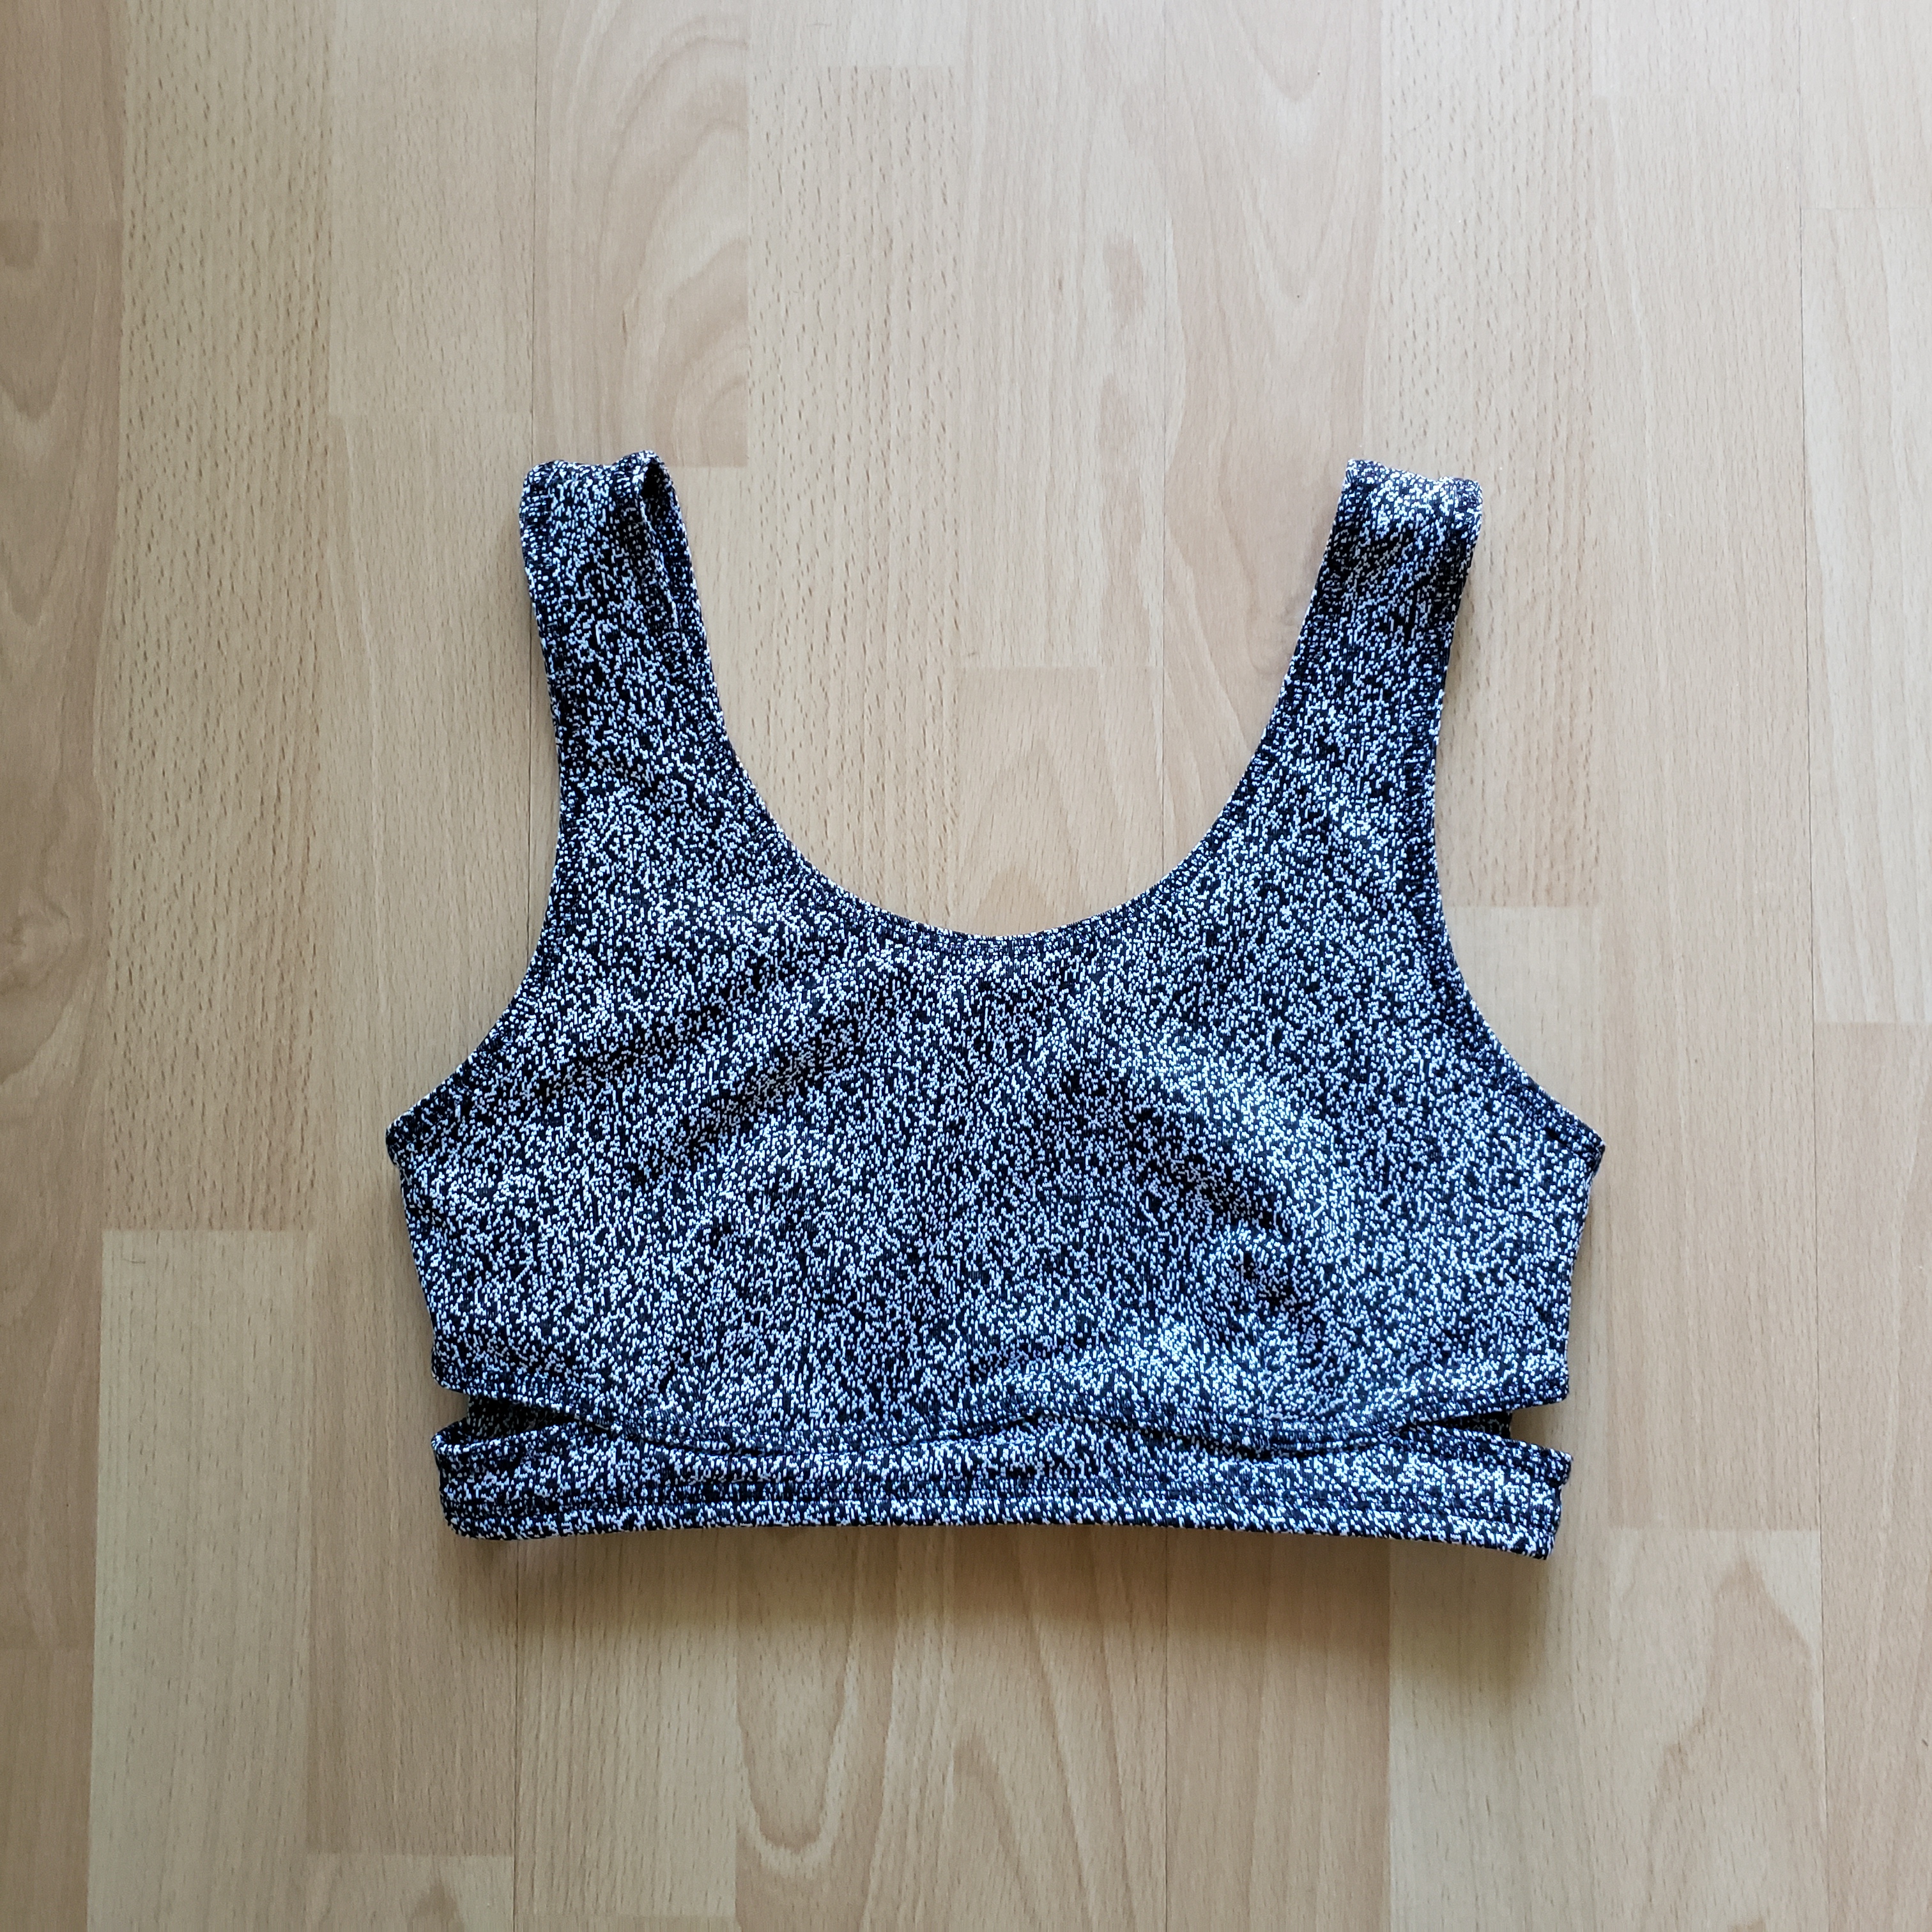 Amazon Fashion AURIQUE Yoga Sports Bra What I Bought In September ‘19